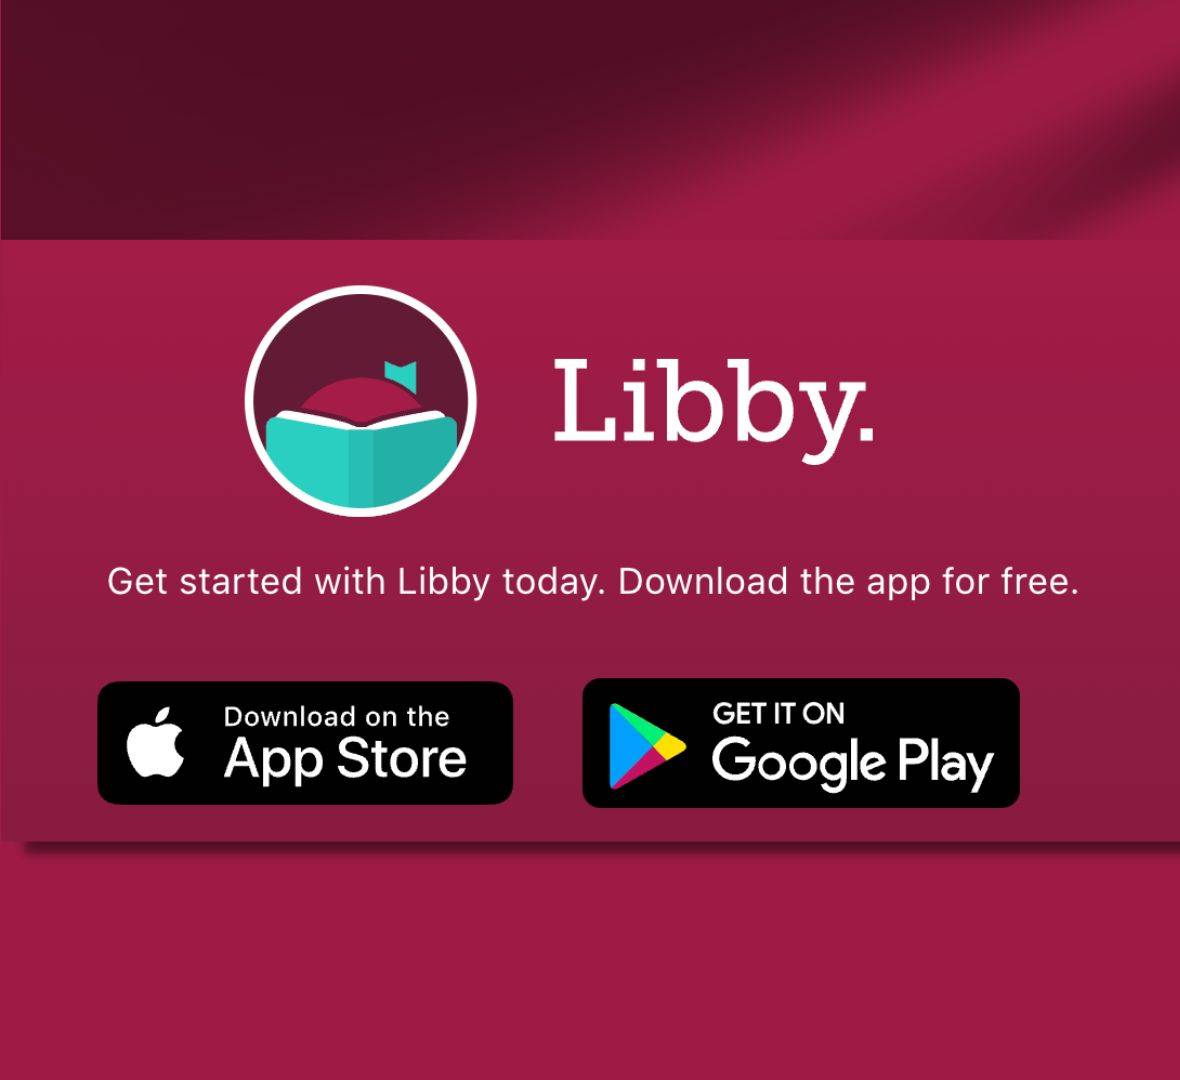 Libby by overdrive for ebooks and digital audiobooks